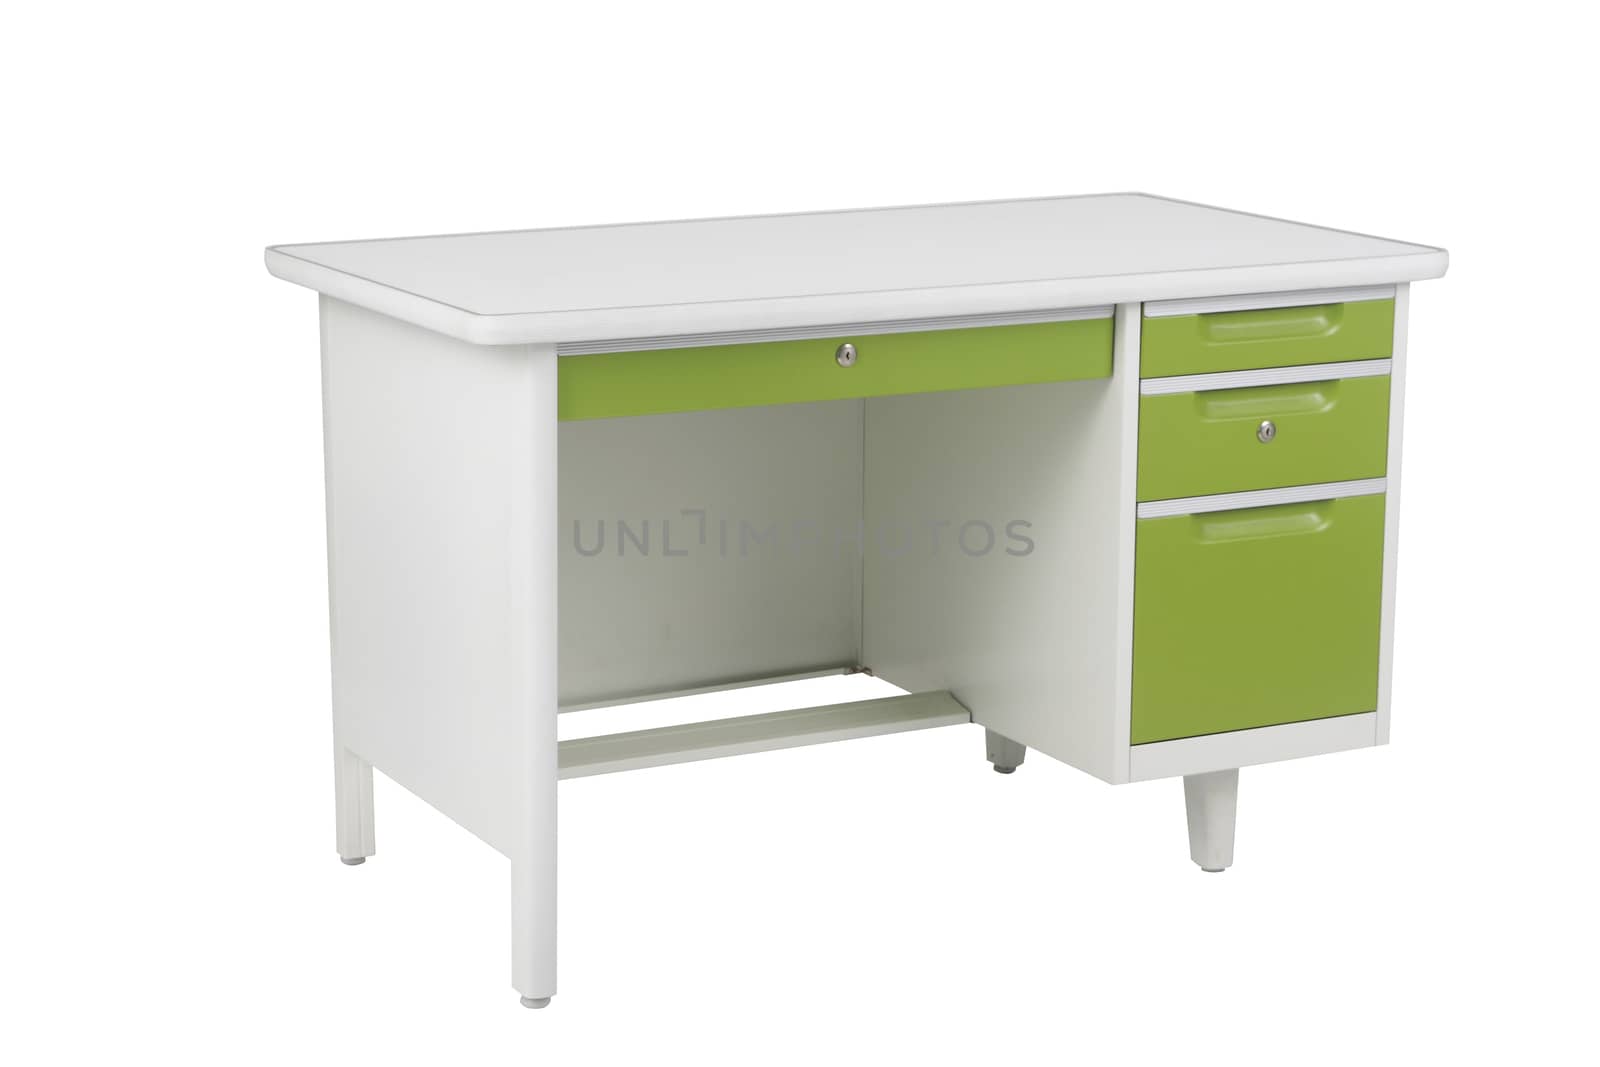 Green and white steel office table with drawers furniture isolated on white background.